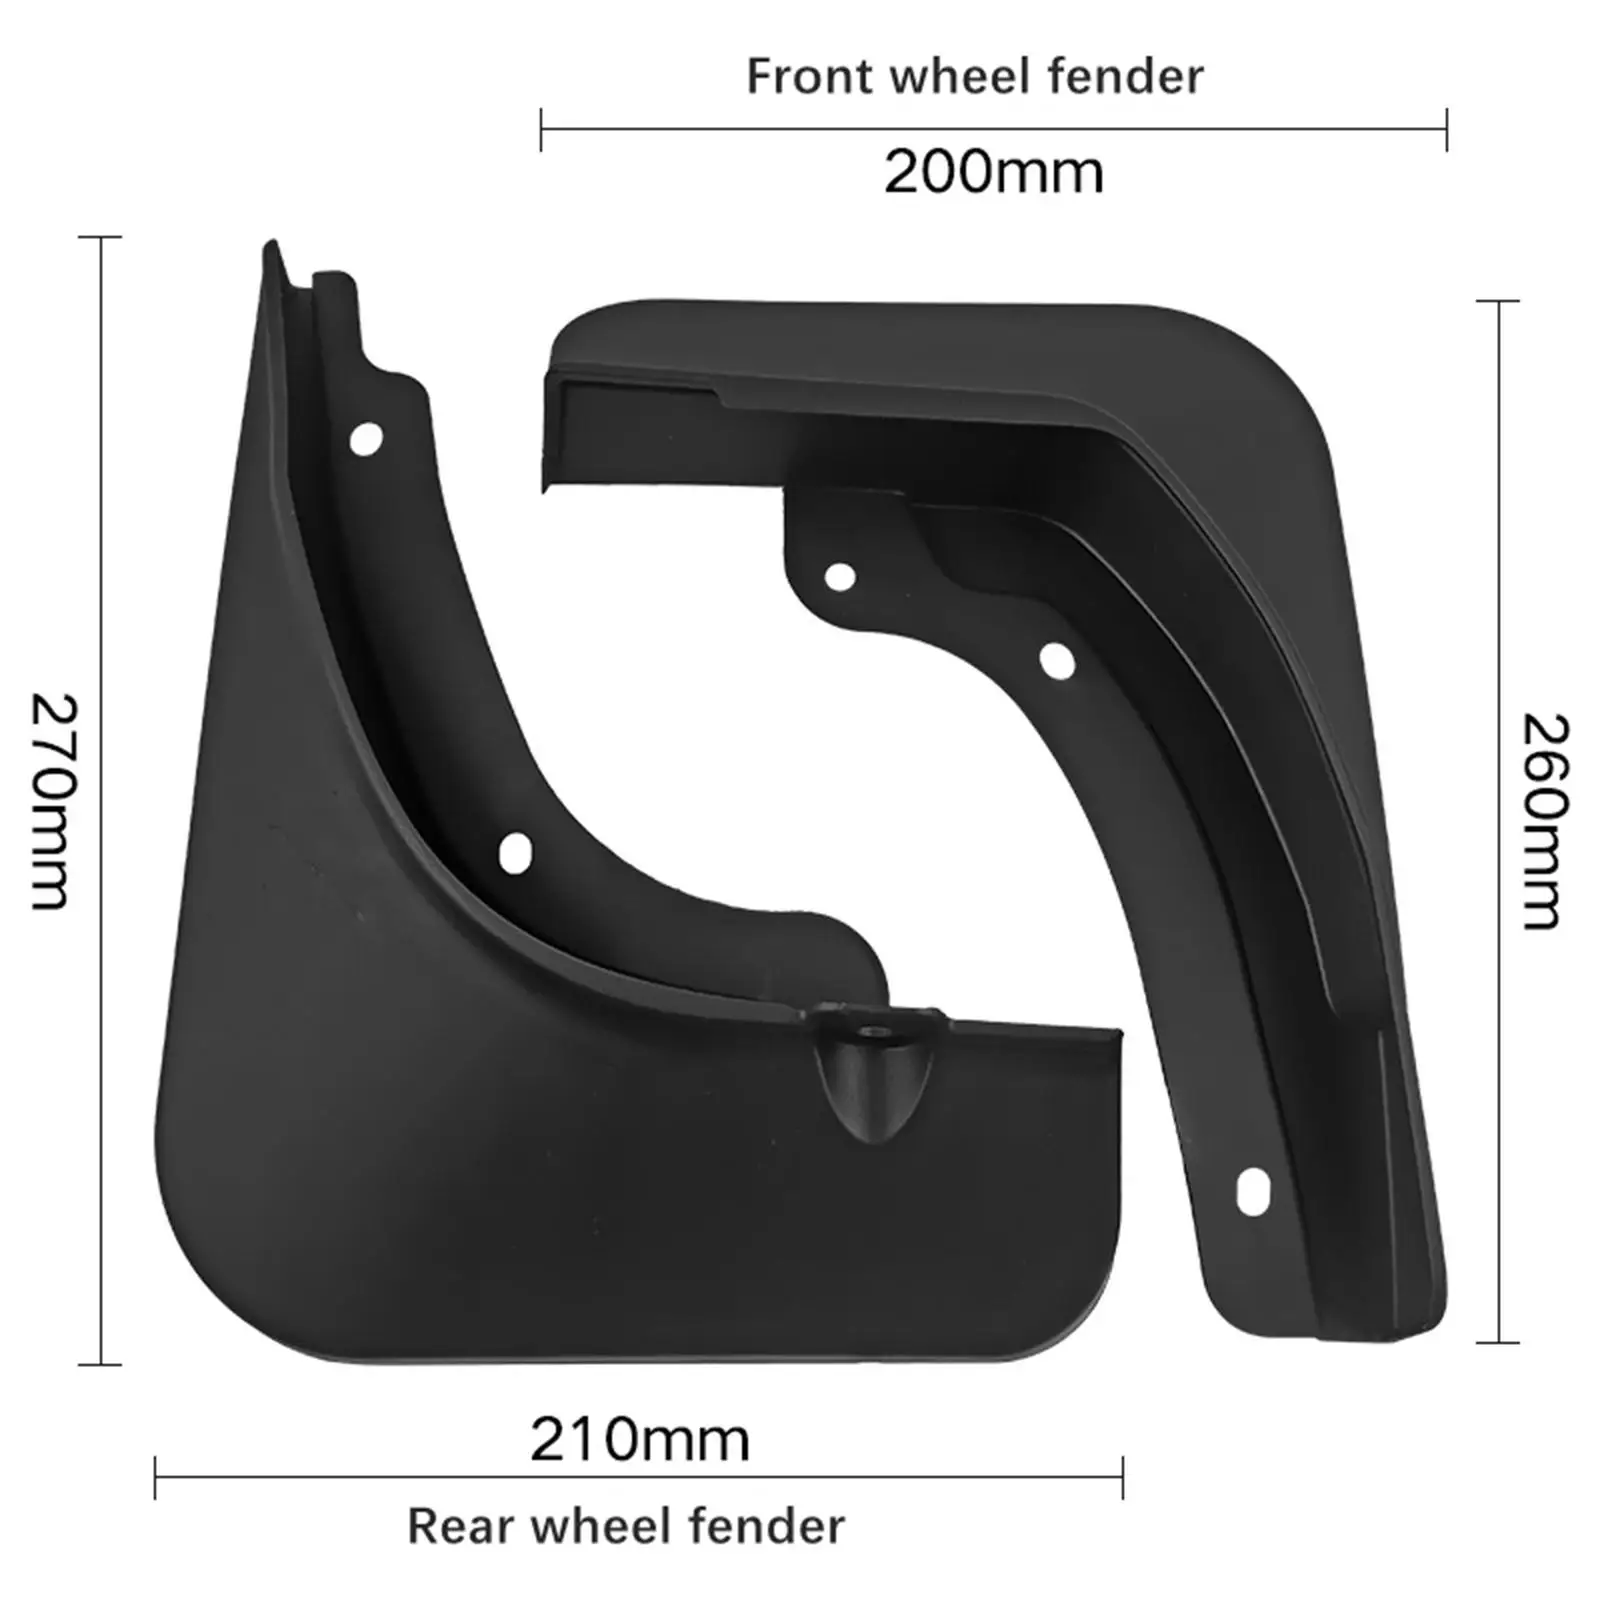 4 Pieces Front and Rear Mud Flaps Protection with Screws Mud Guards Mudguard for Kia Sportage Flexible Accessories Durable